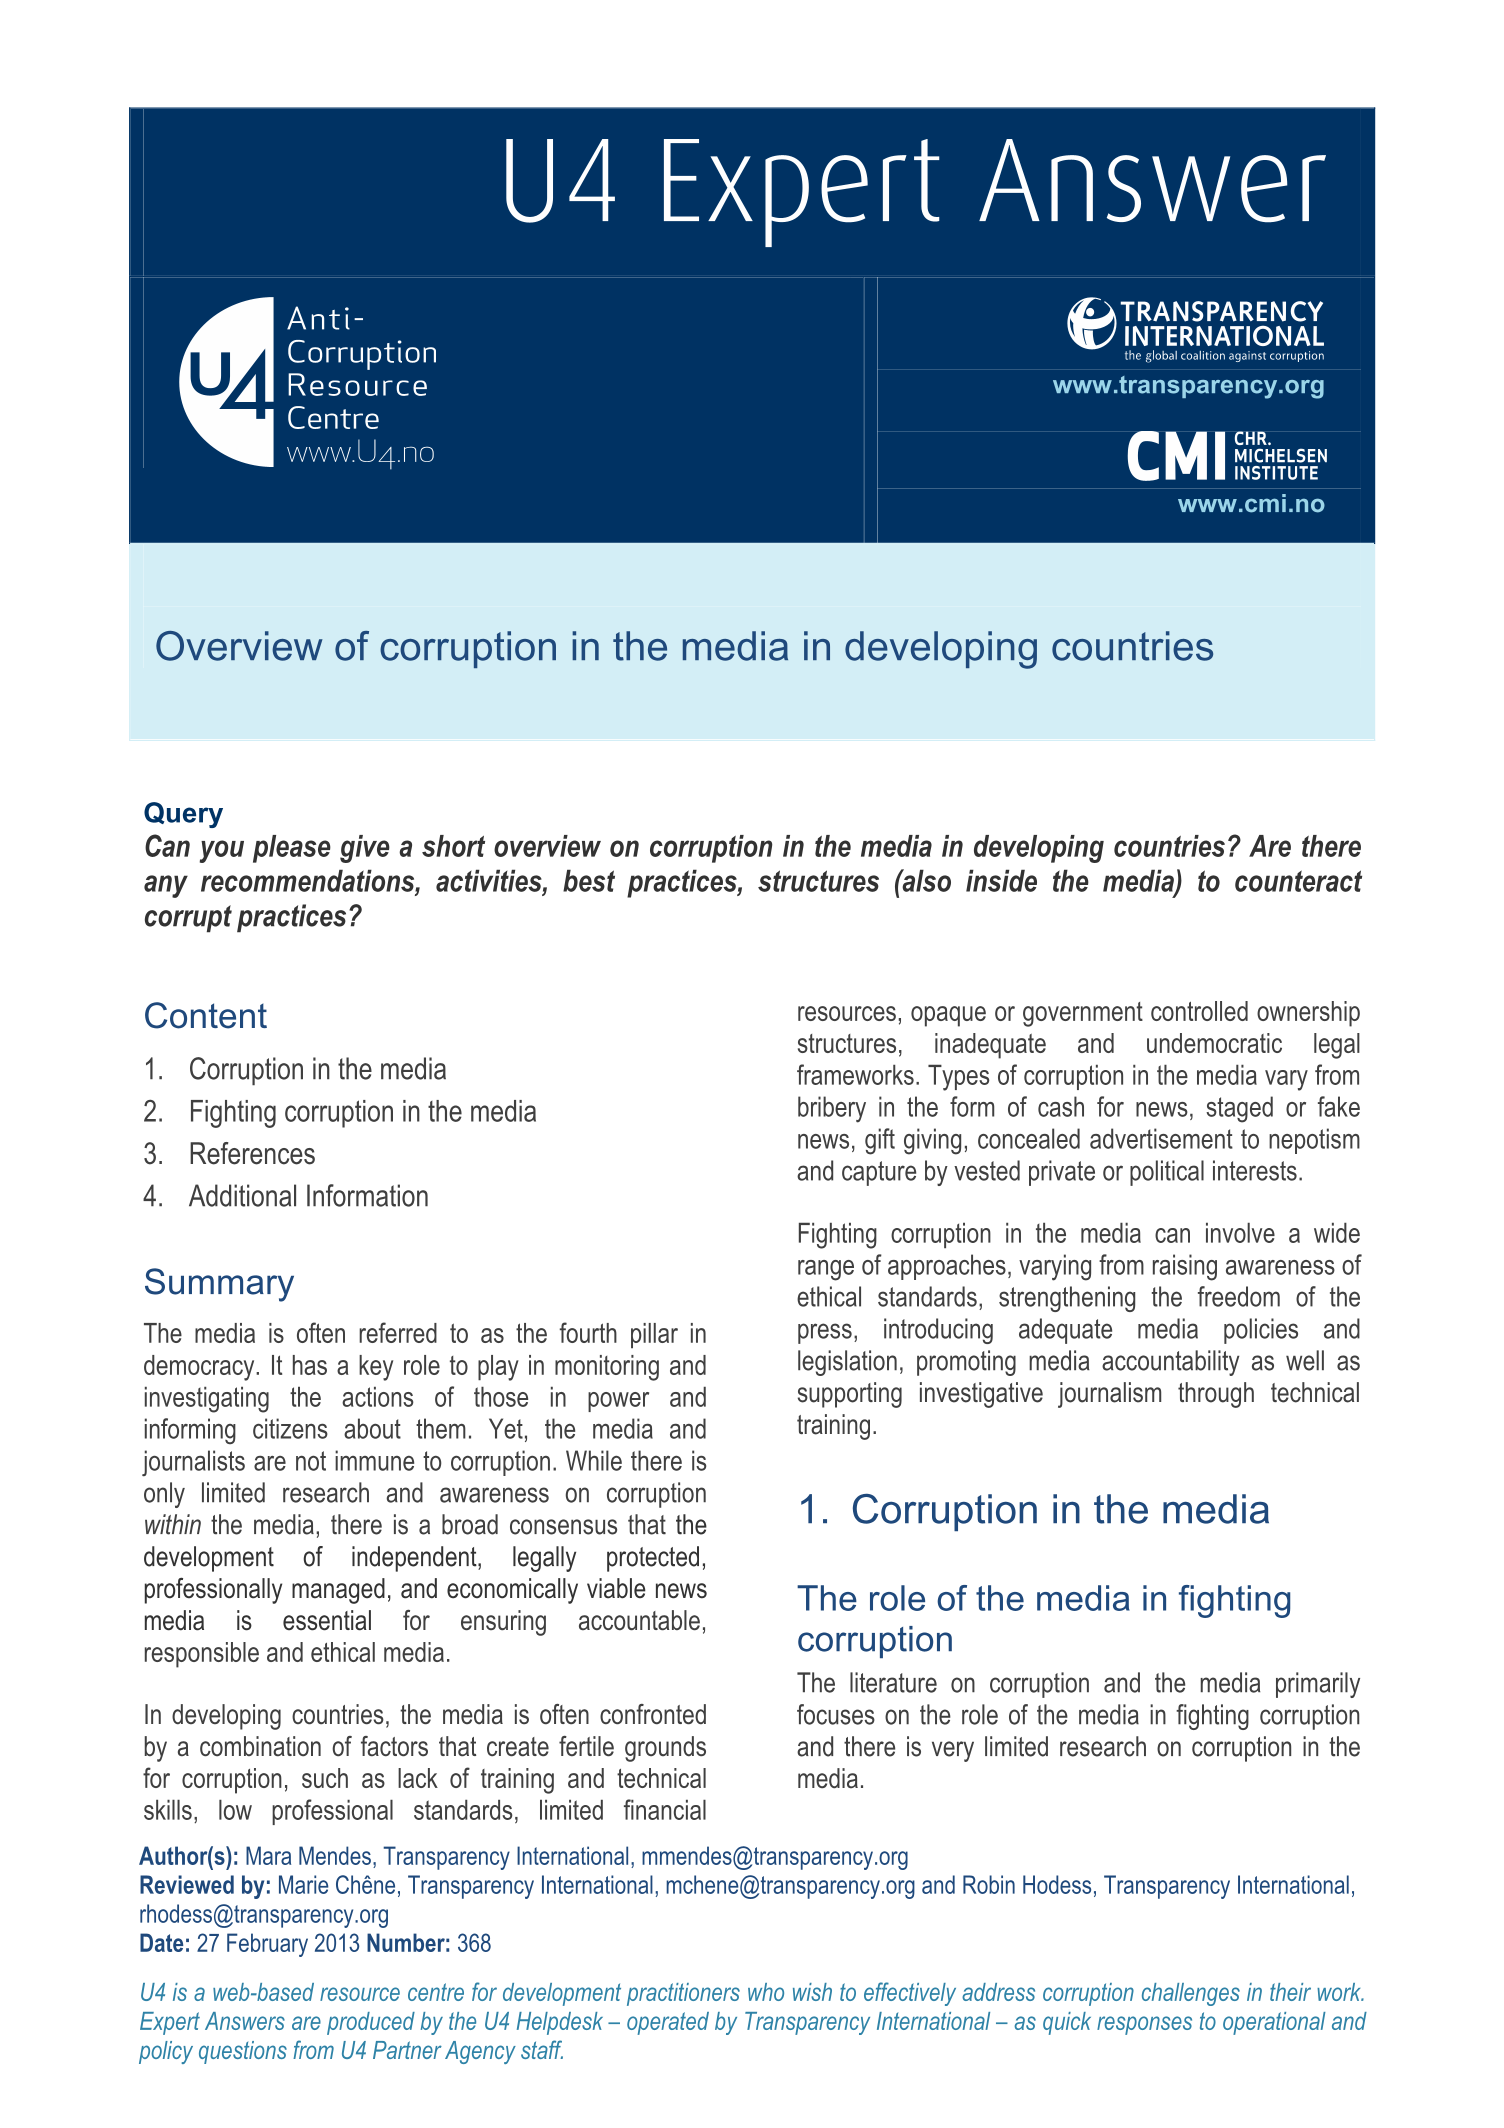 Overview of corruption in the media in developing countries